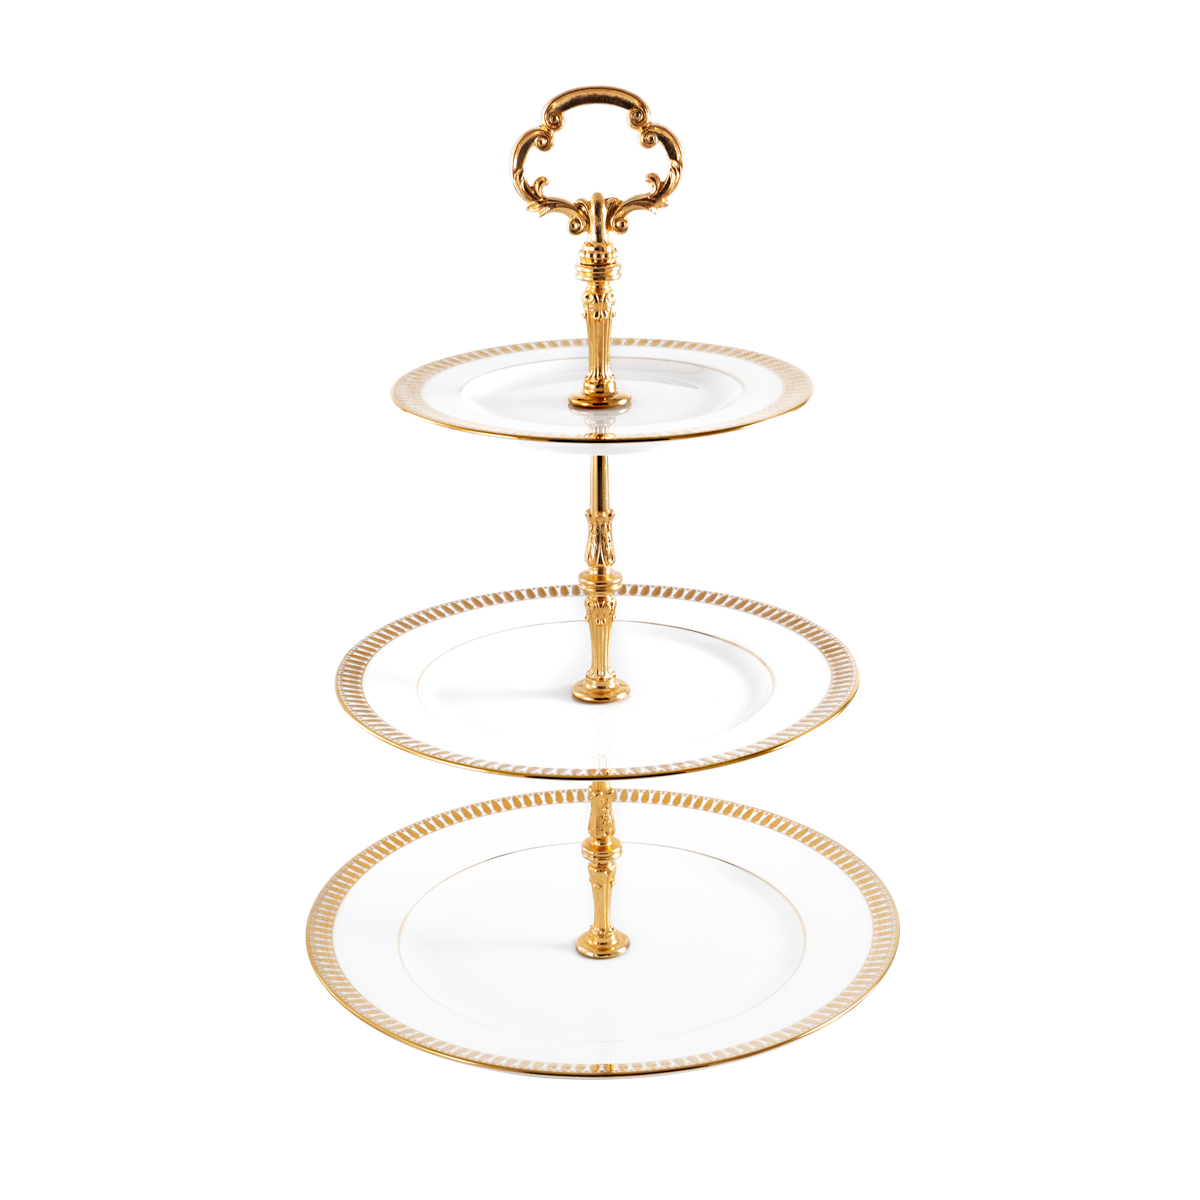 3 Tier cake plate - Plumes Or